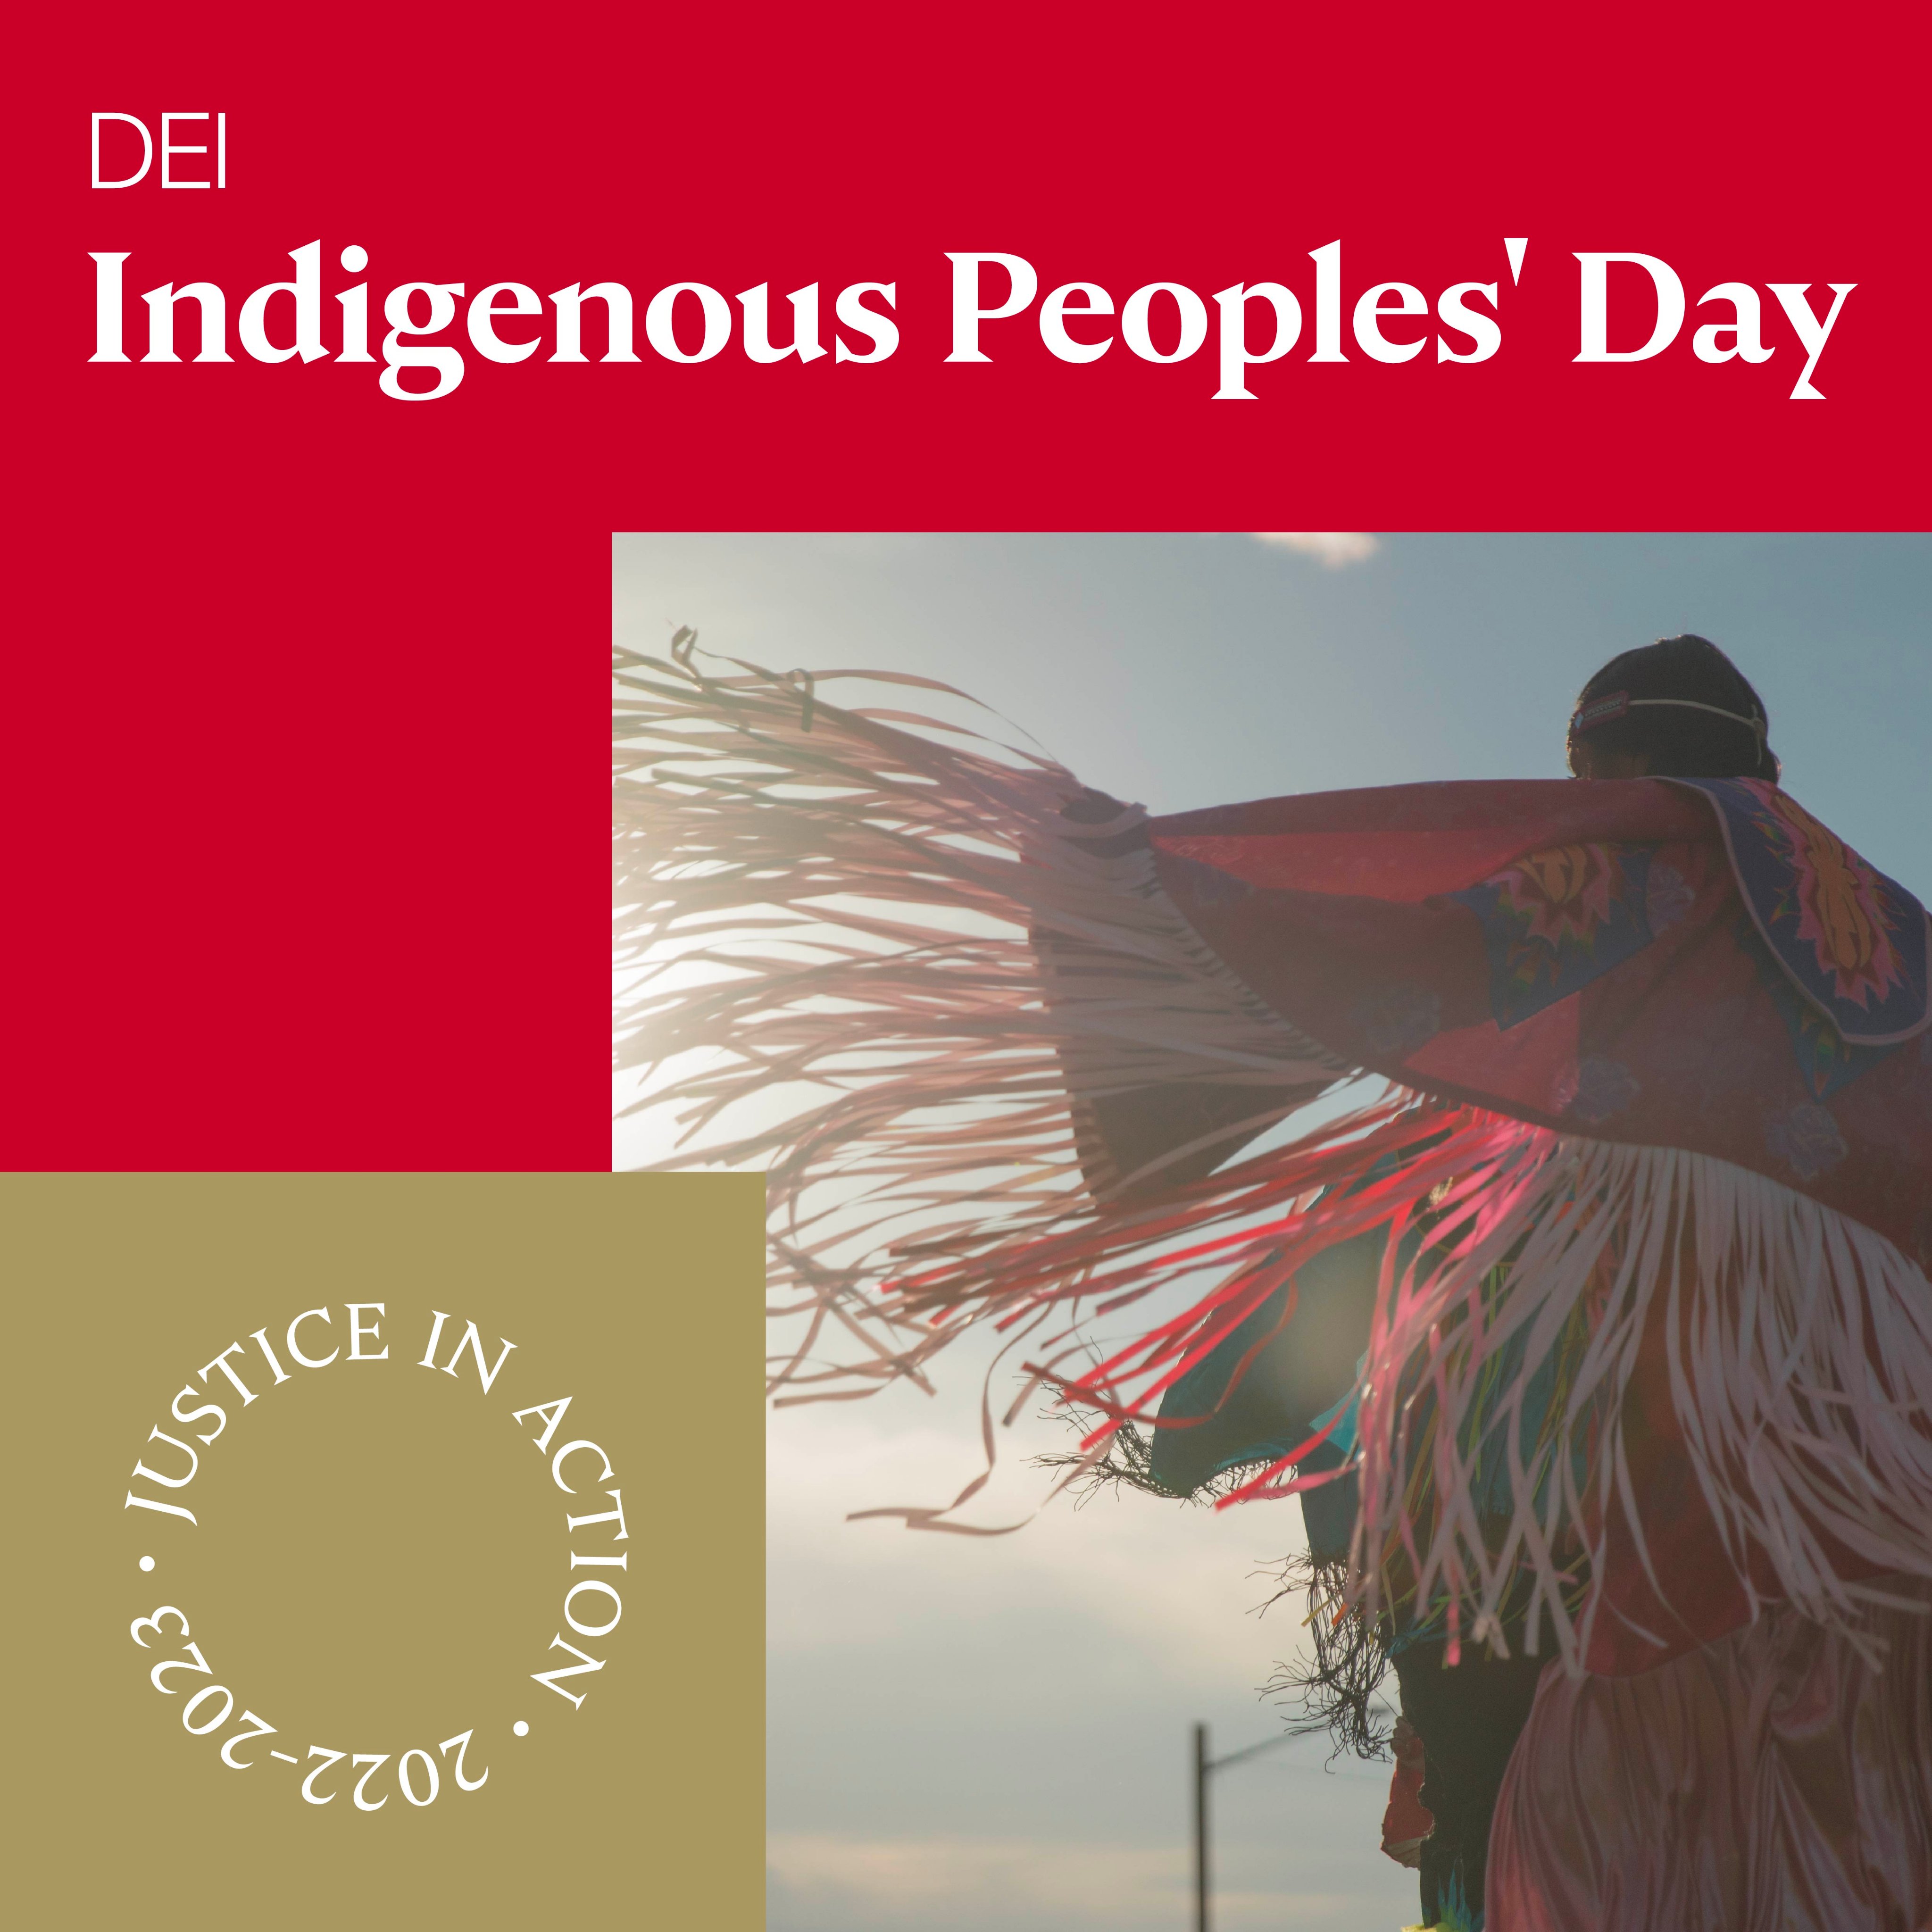 University Of Denver On Twitter: Indigenous Peoples' Day Honors The Past,  Present, And Futures Of Native Peoples Throughout The Us. Here At Du, We  Recognize The Legacy And Impact Of Colonialism On